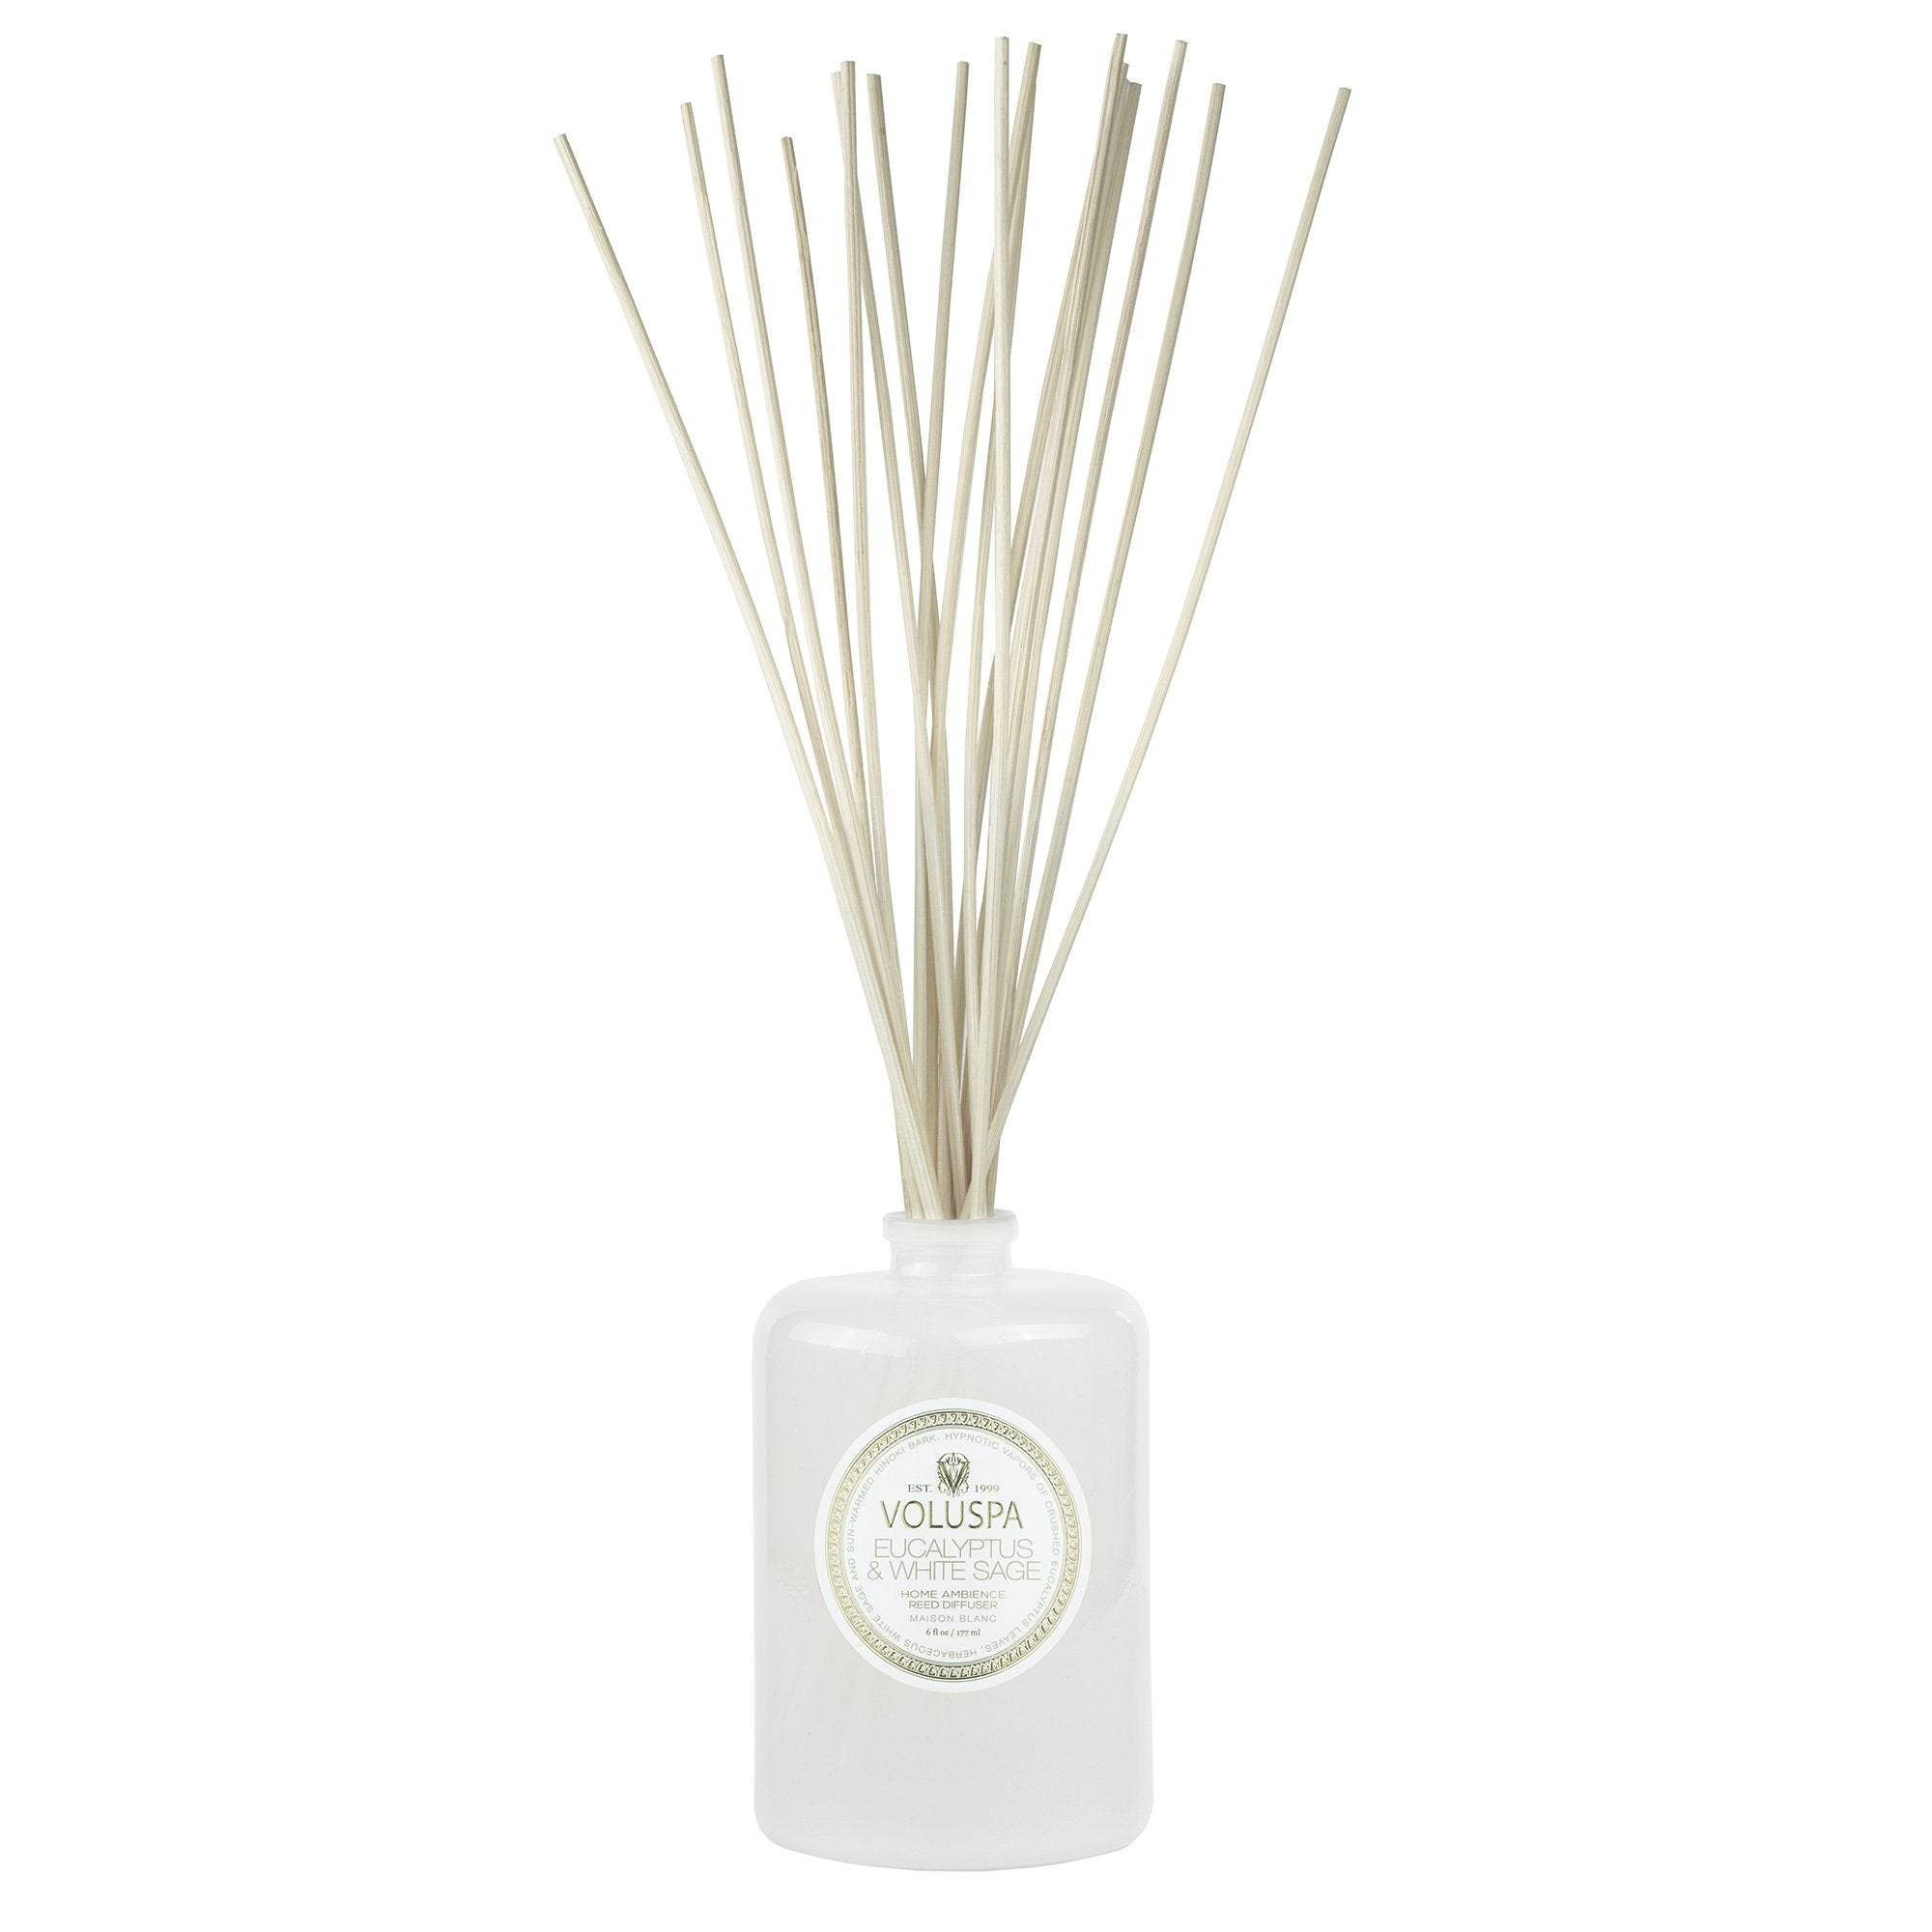 LOVSPA Revive Eucalyptus Reed Diffuser Oil Refill with Replacement Reed Sticks | Eucalyptus Essential Oil, Sage, Bamboo, Citrus and Mint. | 4 Oz| Made